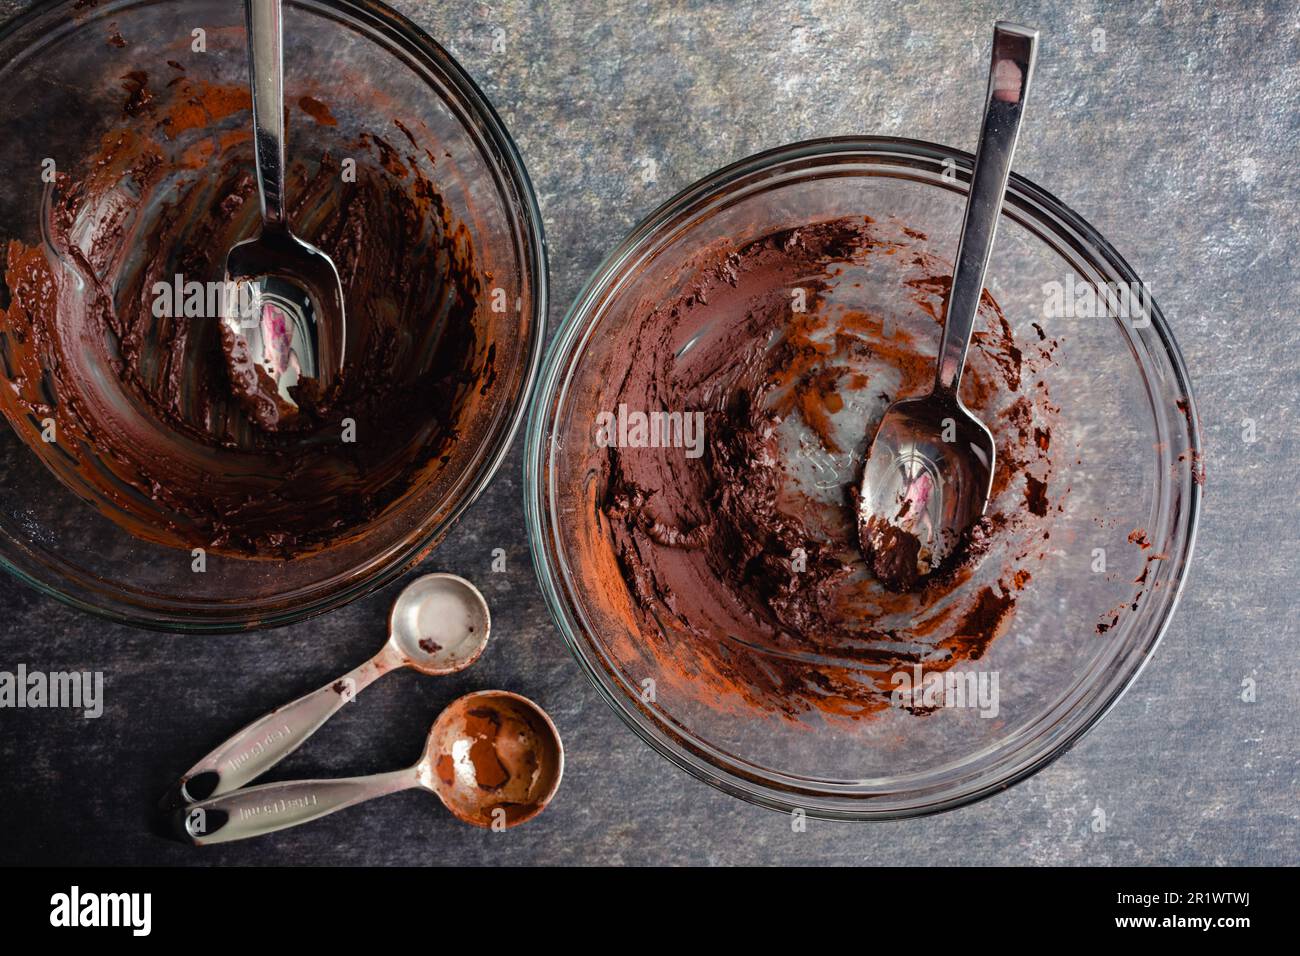 https://c8.alamy.com/comp/2R1WTWJ/glass-mixing-bowls-used-to-make-cocoa-paste-dirty-mixing-bowls-and-spoons-used-with-chocolate-paste-2R1WTWJ.jpg